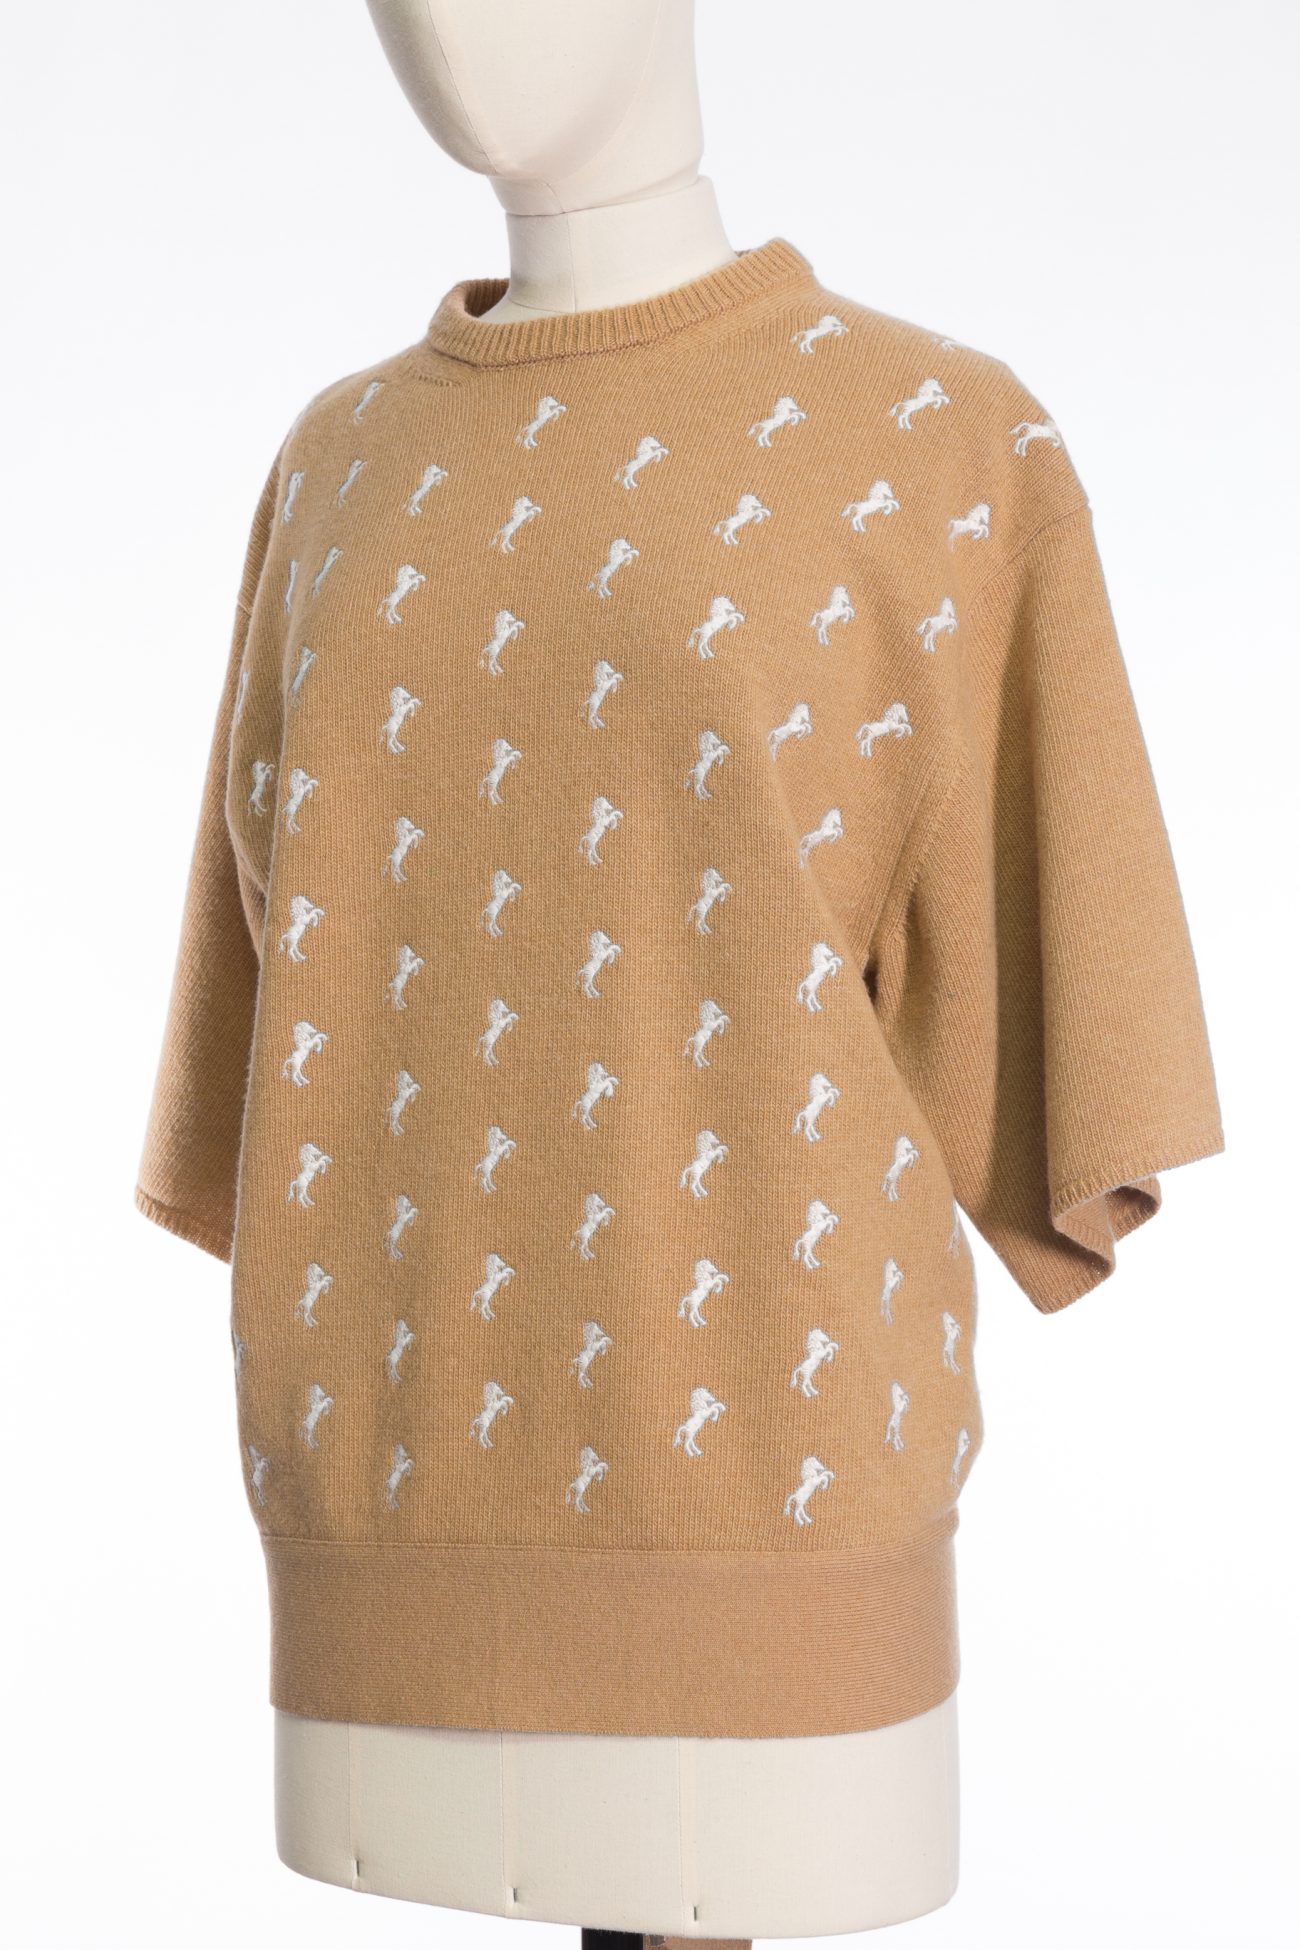 Chloe Embroidered horse sweater